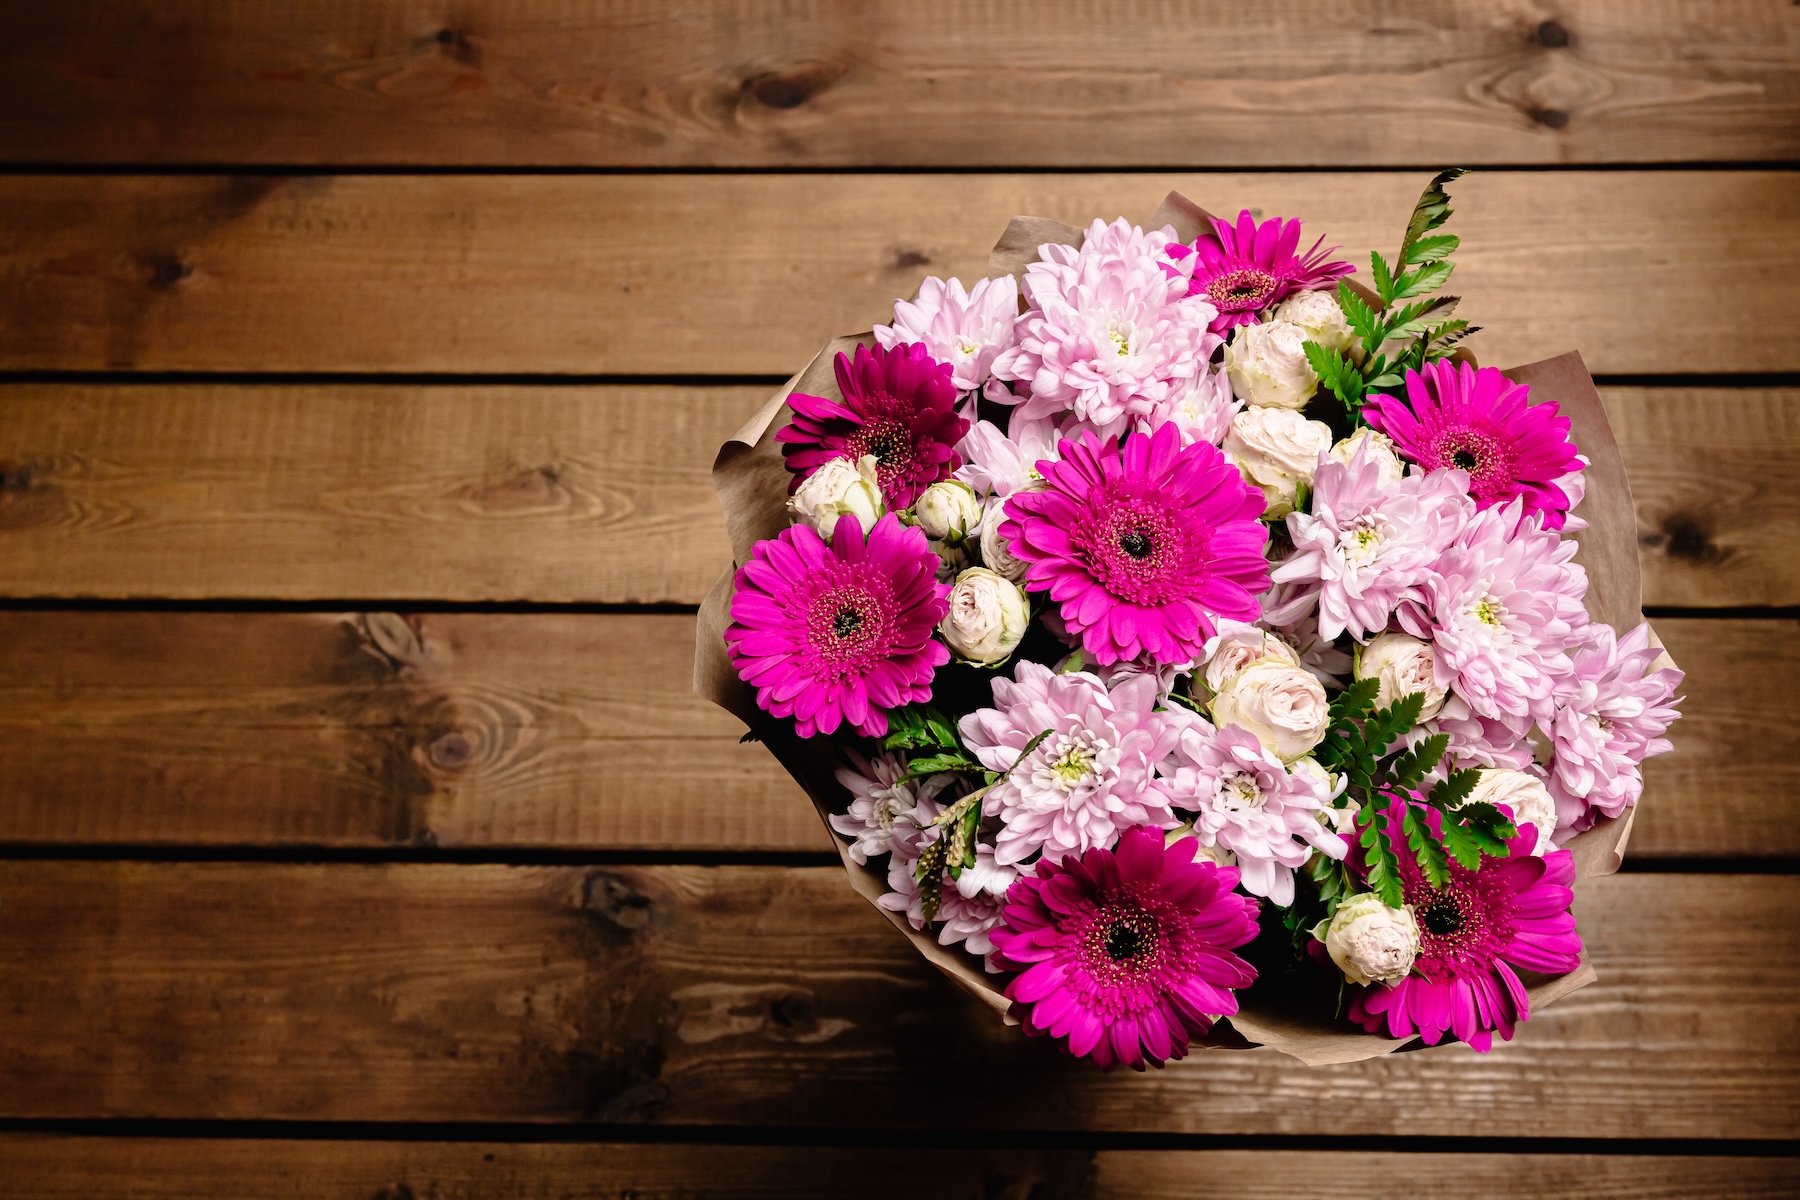 A vibrant Mother's Day bouquet of magenta and pink flowers, interspersed with greenery.